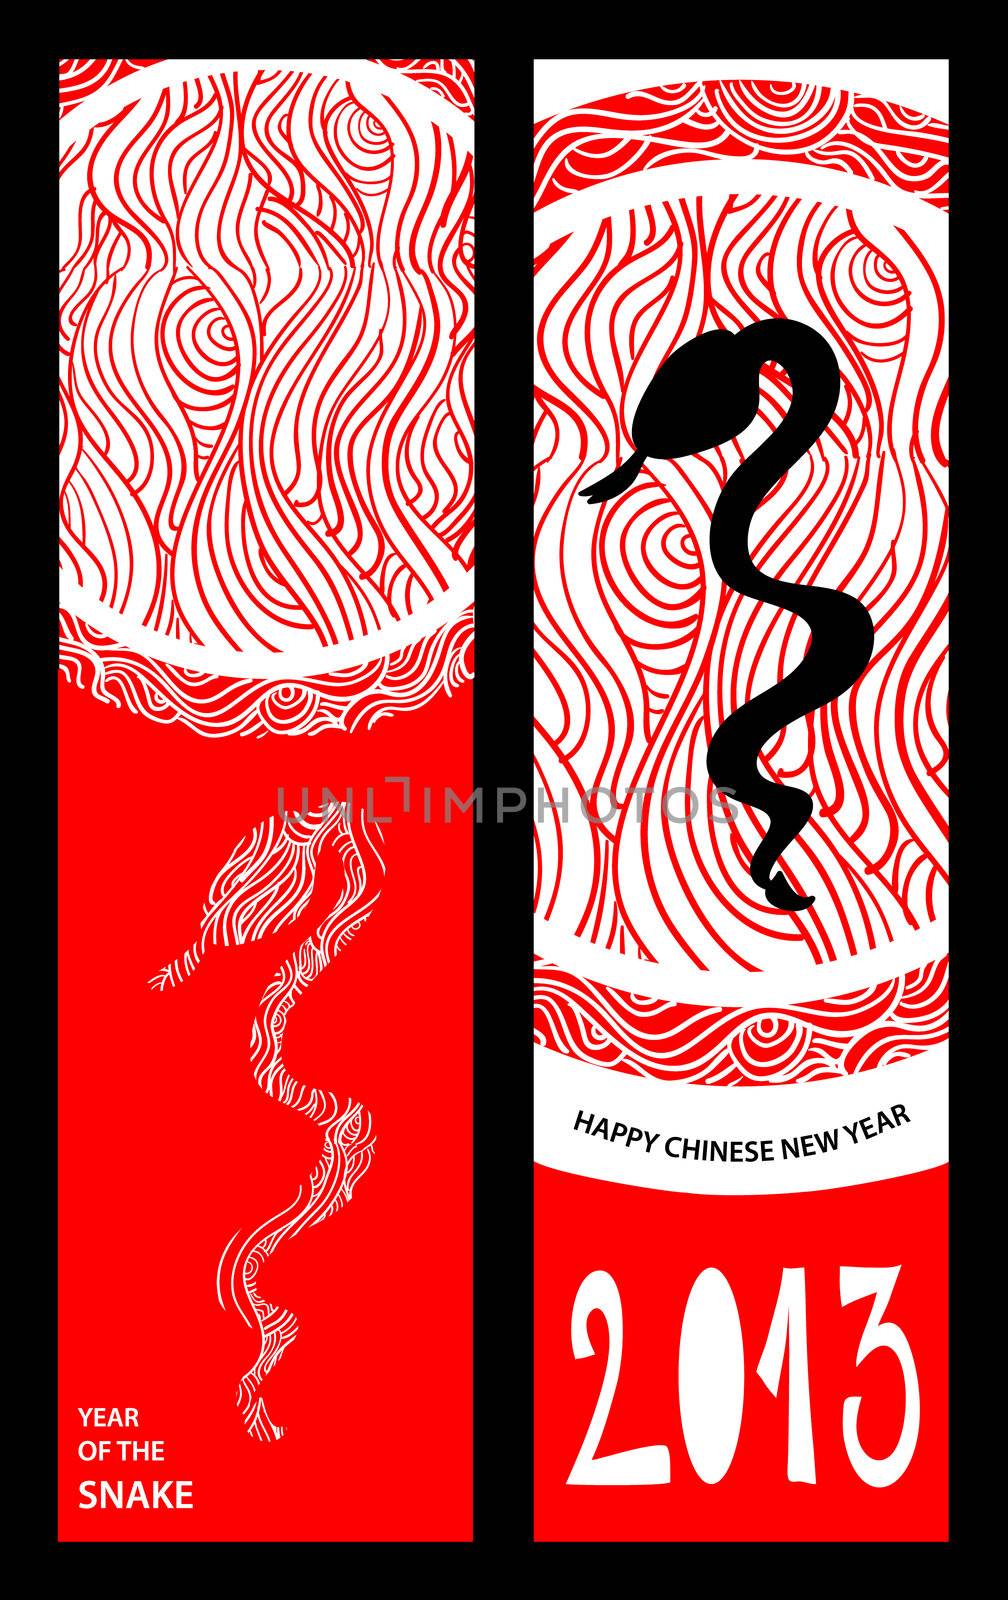 Chinese New Year of the Snake banners by cienpies